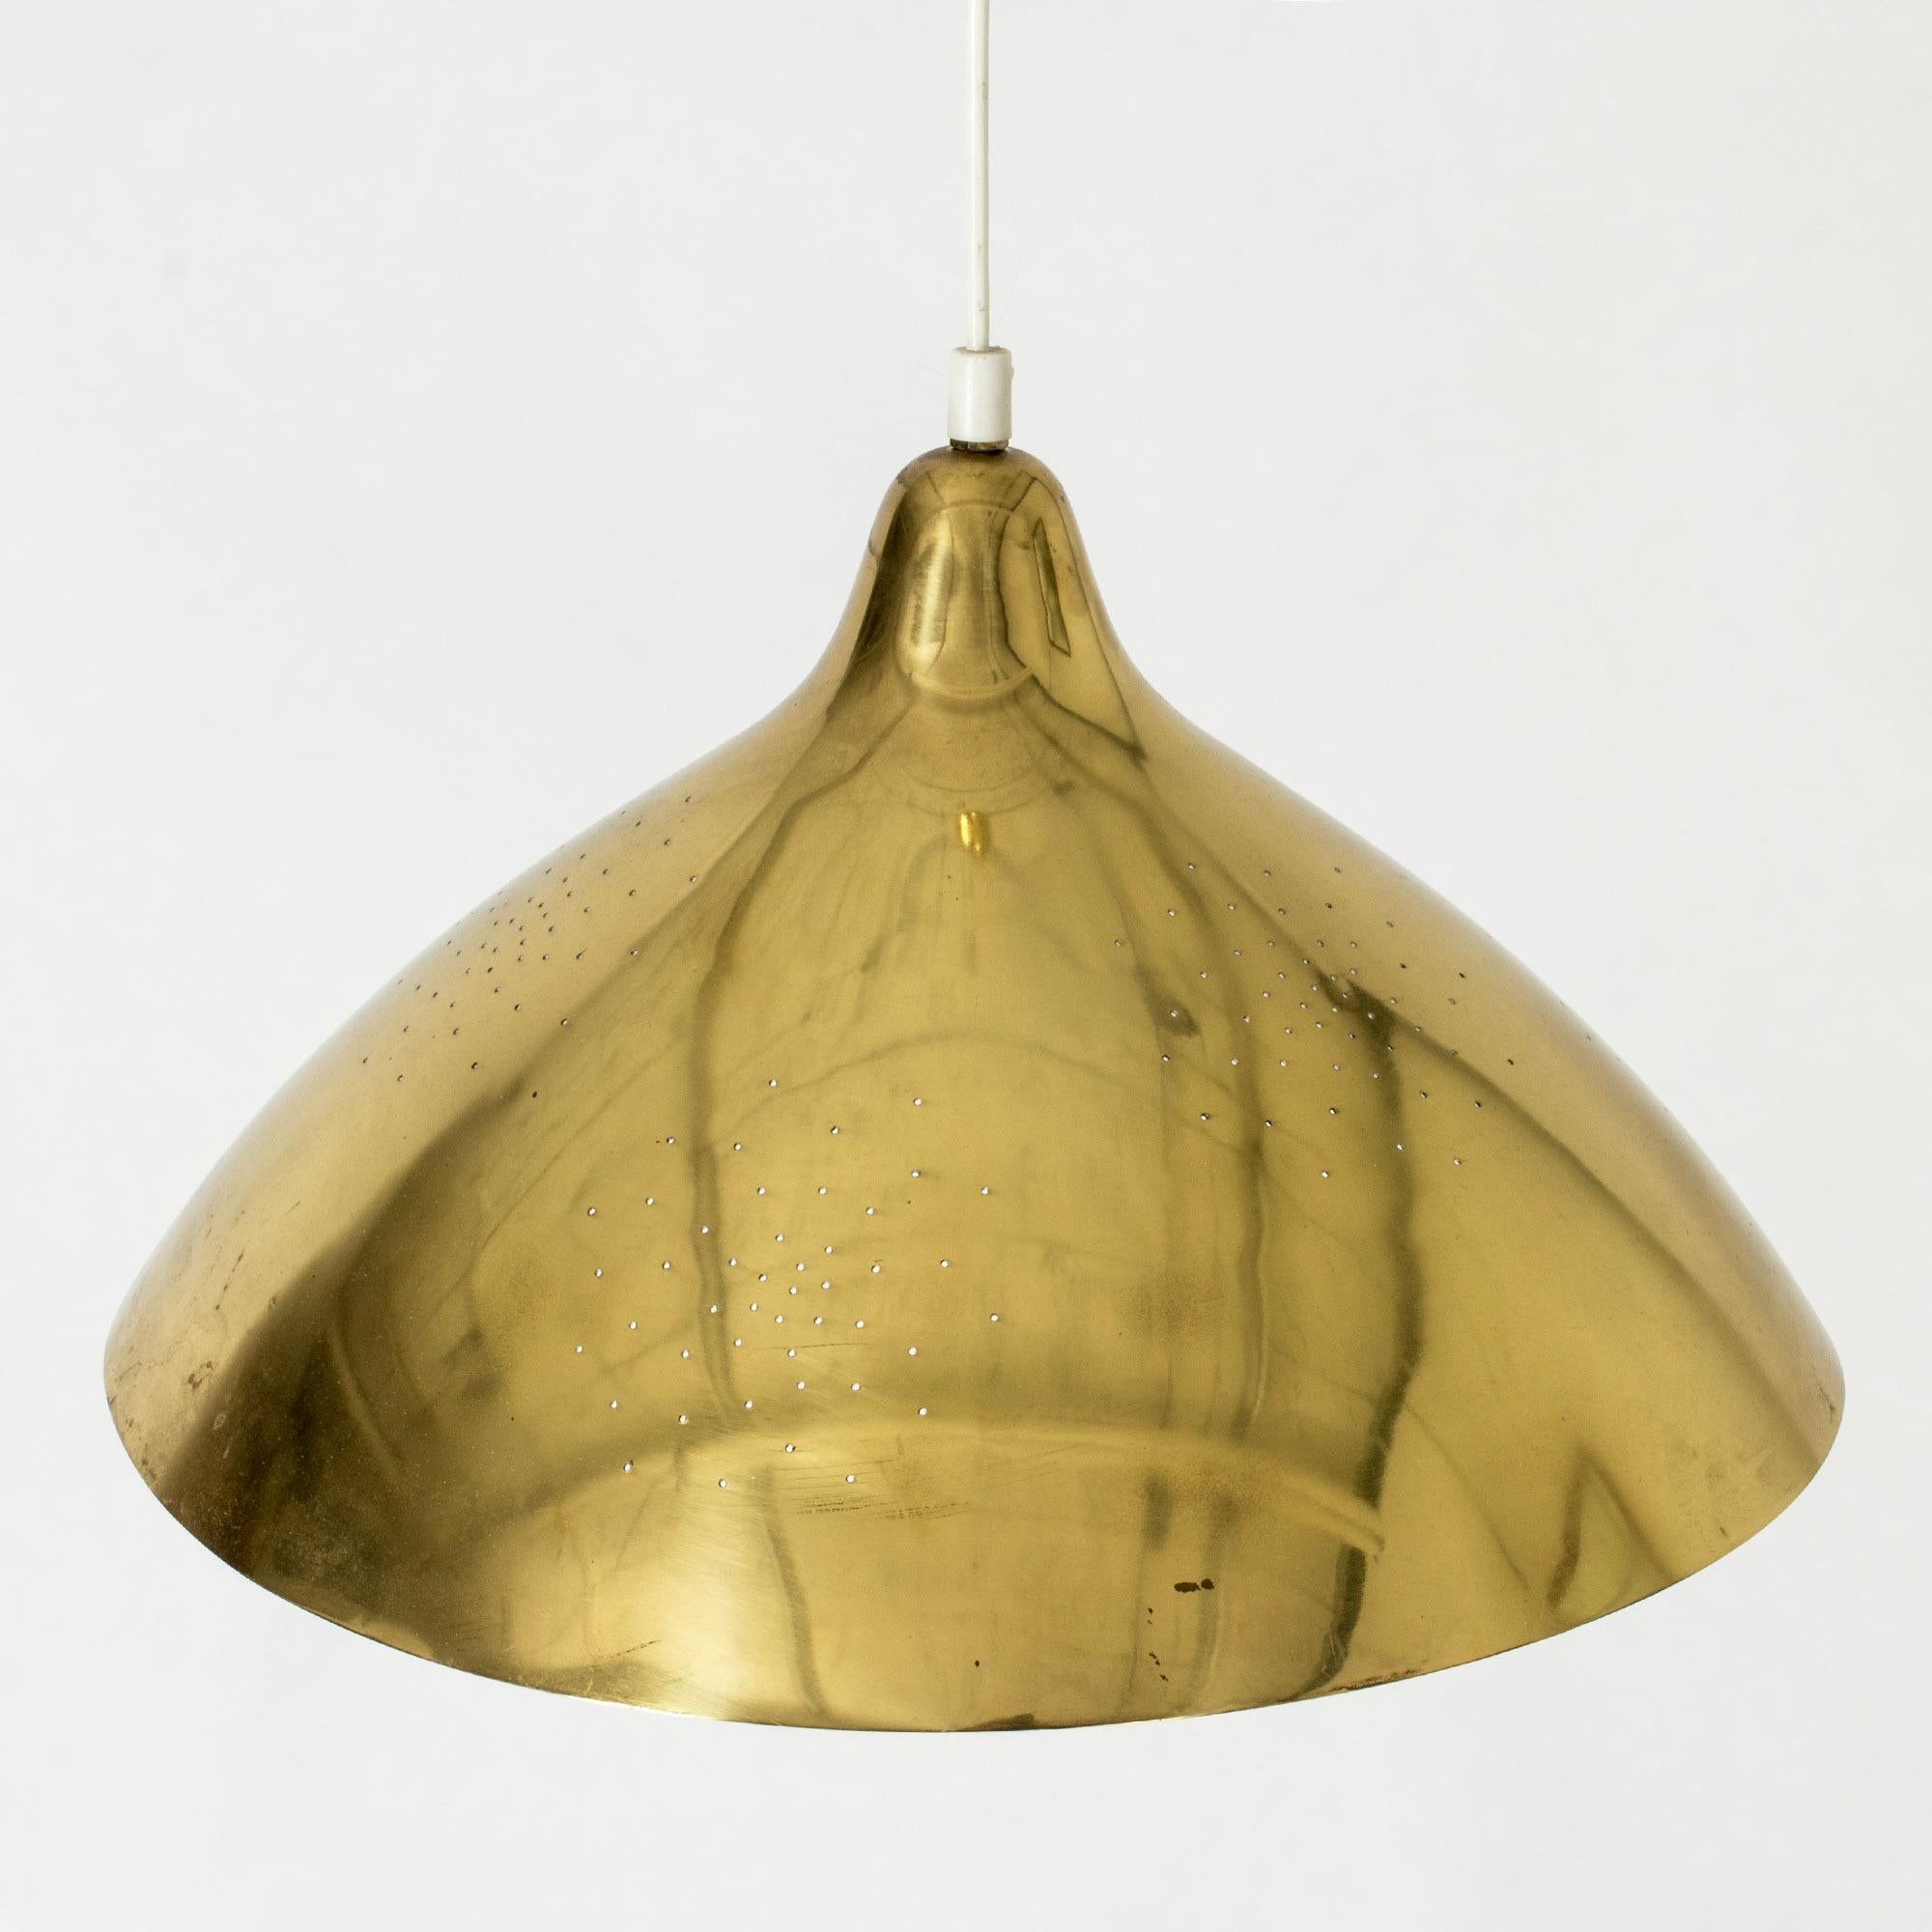 Sleek ceiling light by Lisa Johansson-Pape, made from brass. Voluminous form perforated with small holes that let the light out in a lovely way.